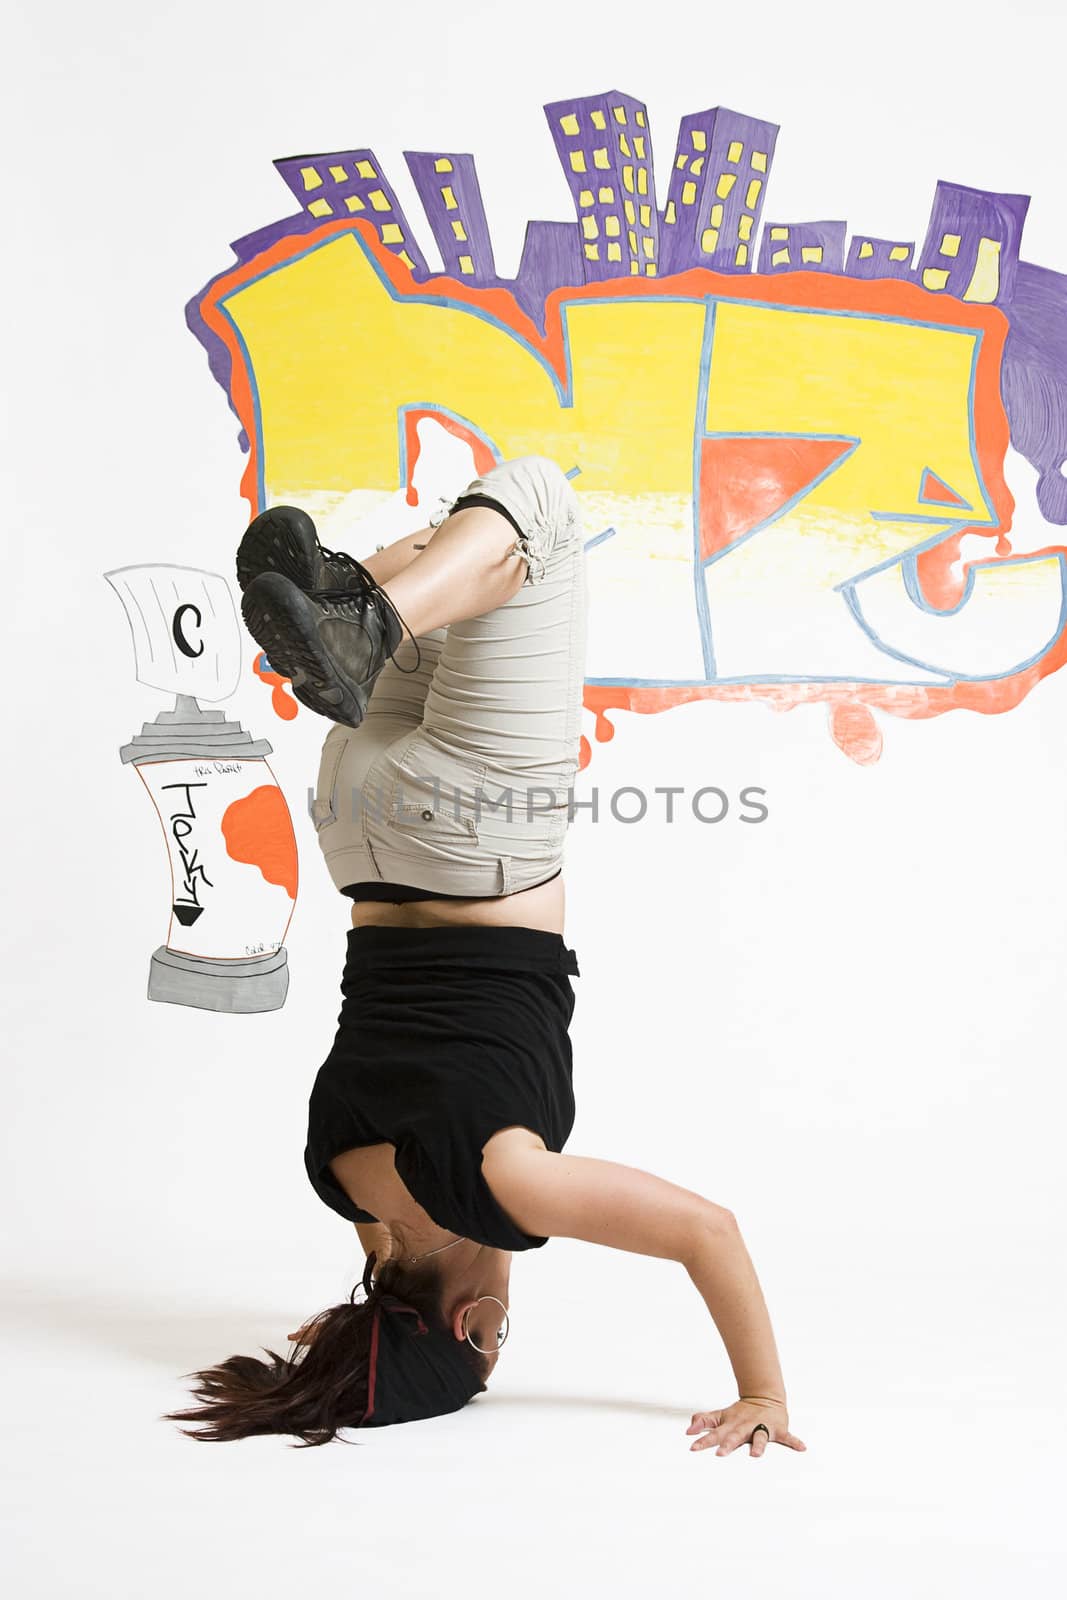 young women in the middle of a breakdancing move balancing on her head done in front of a graffiti background